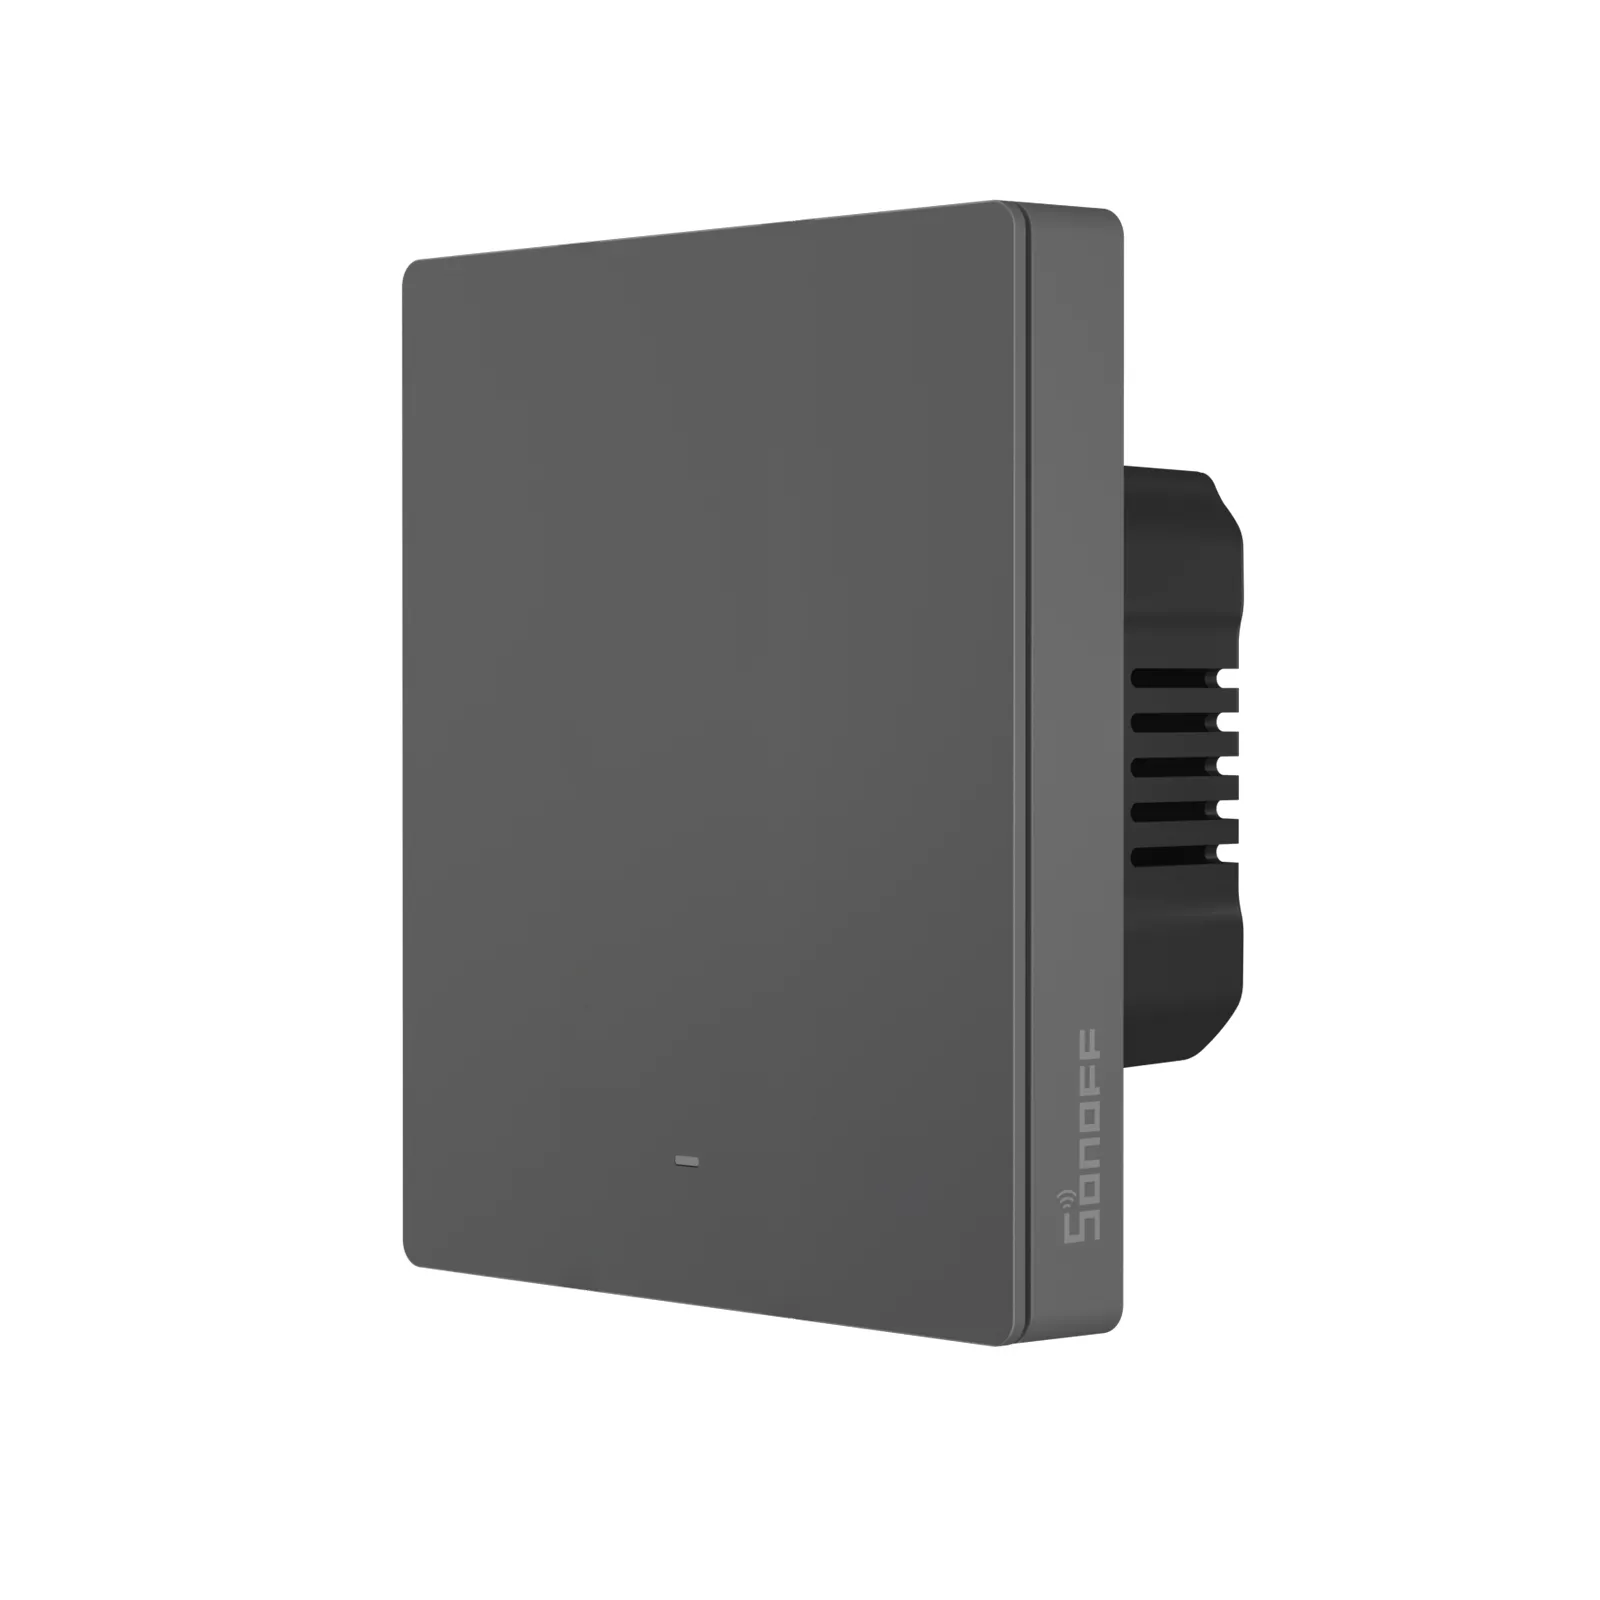 SONOFF SwitchMan Smart Wall Switch-M5 2